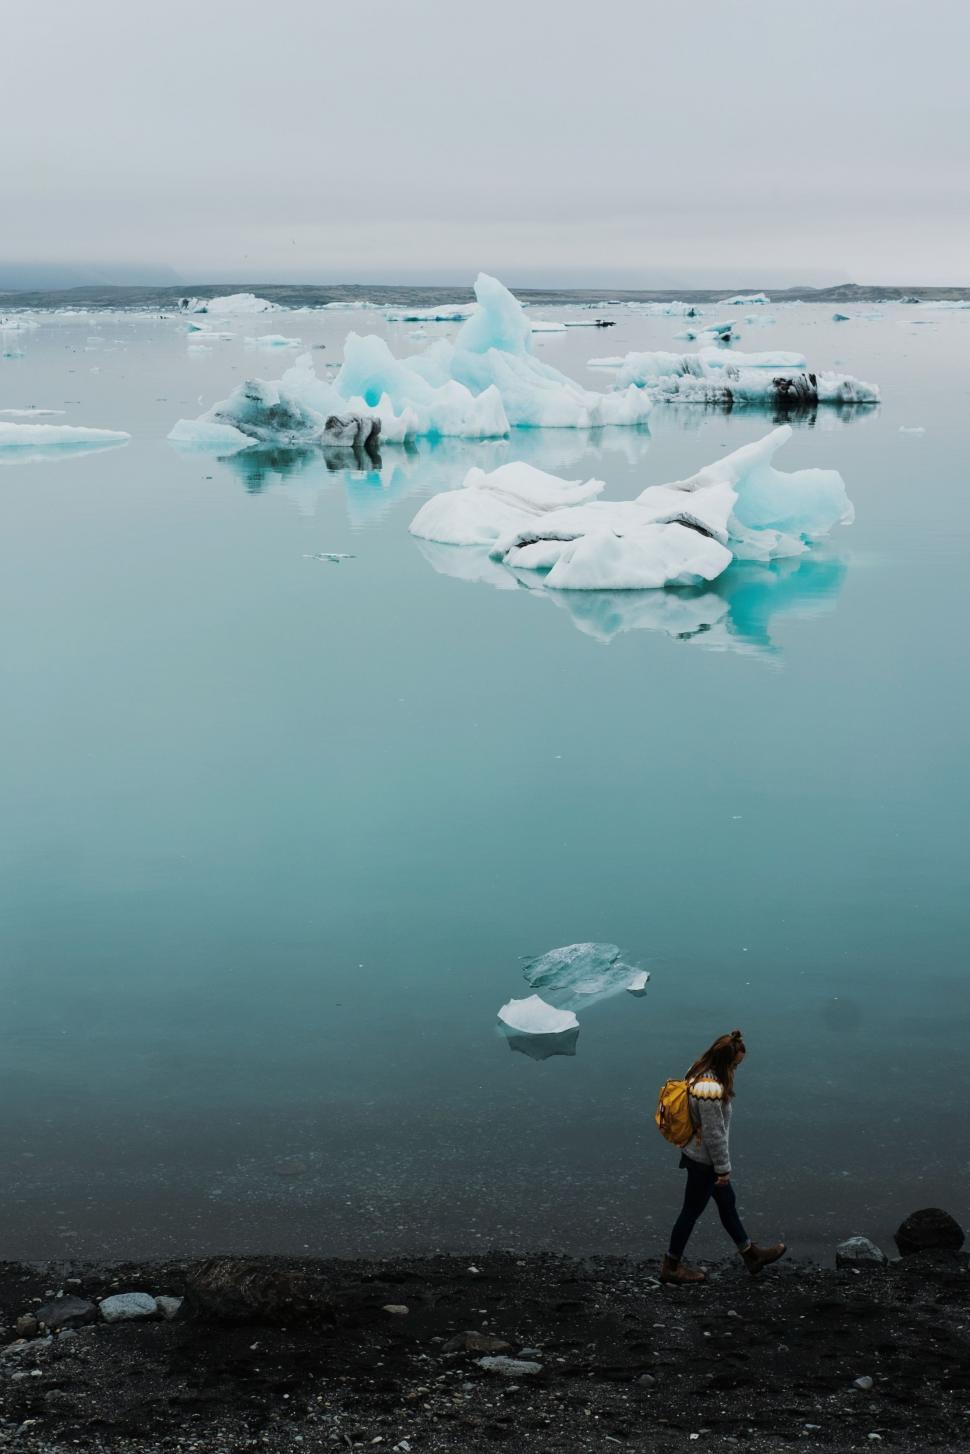 Free Image of Person Walking on Shore With Icebergs 